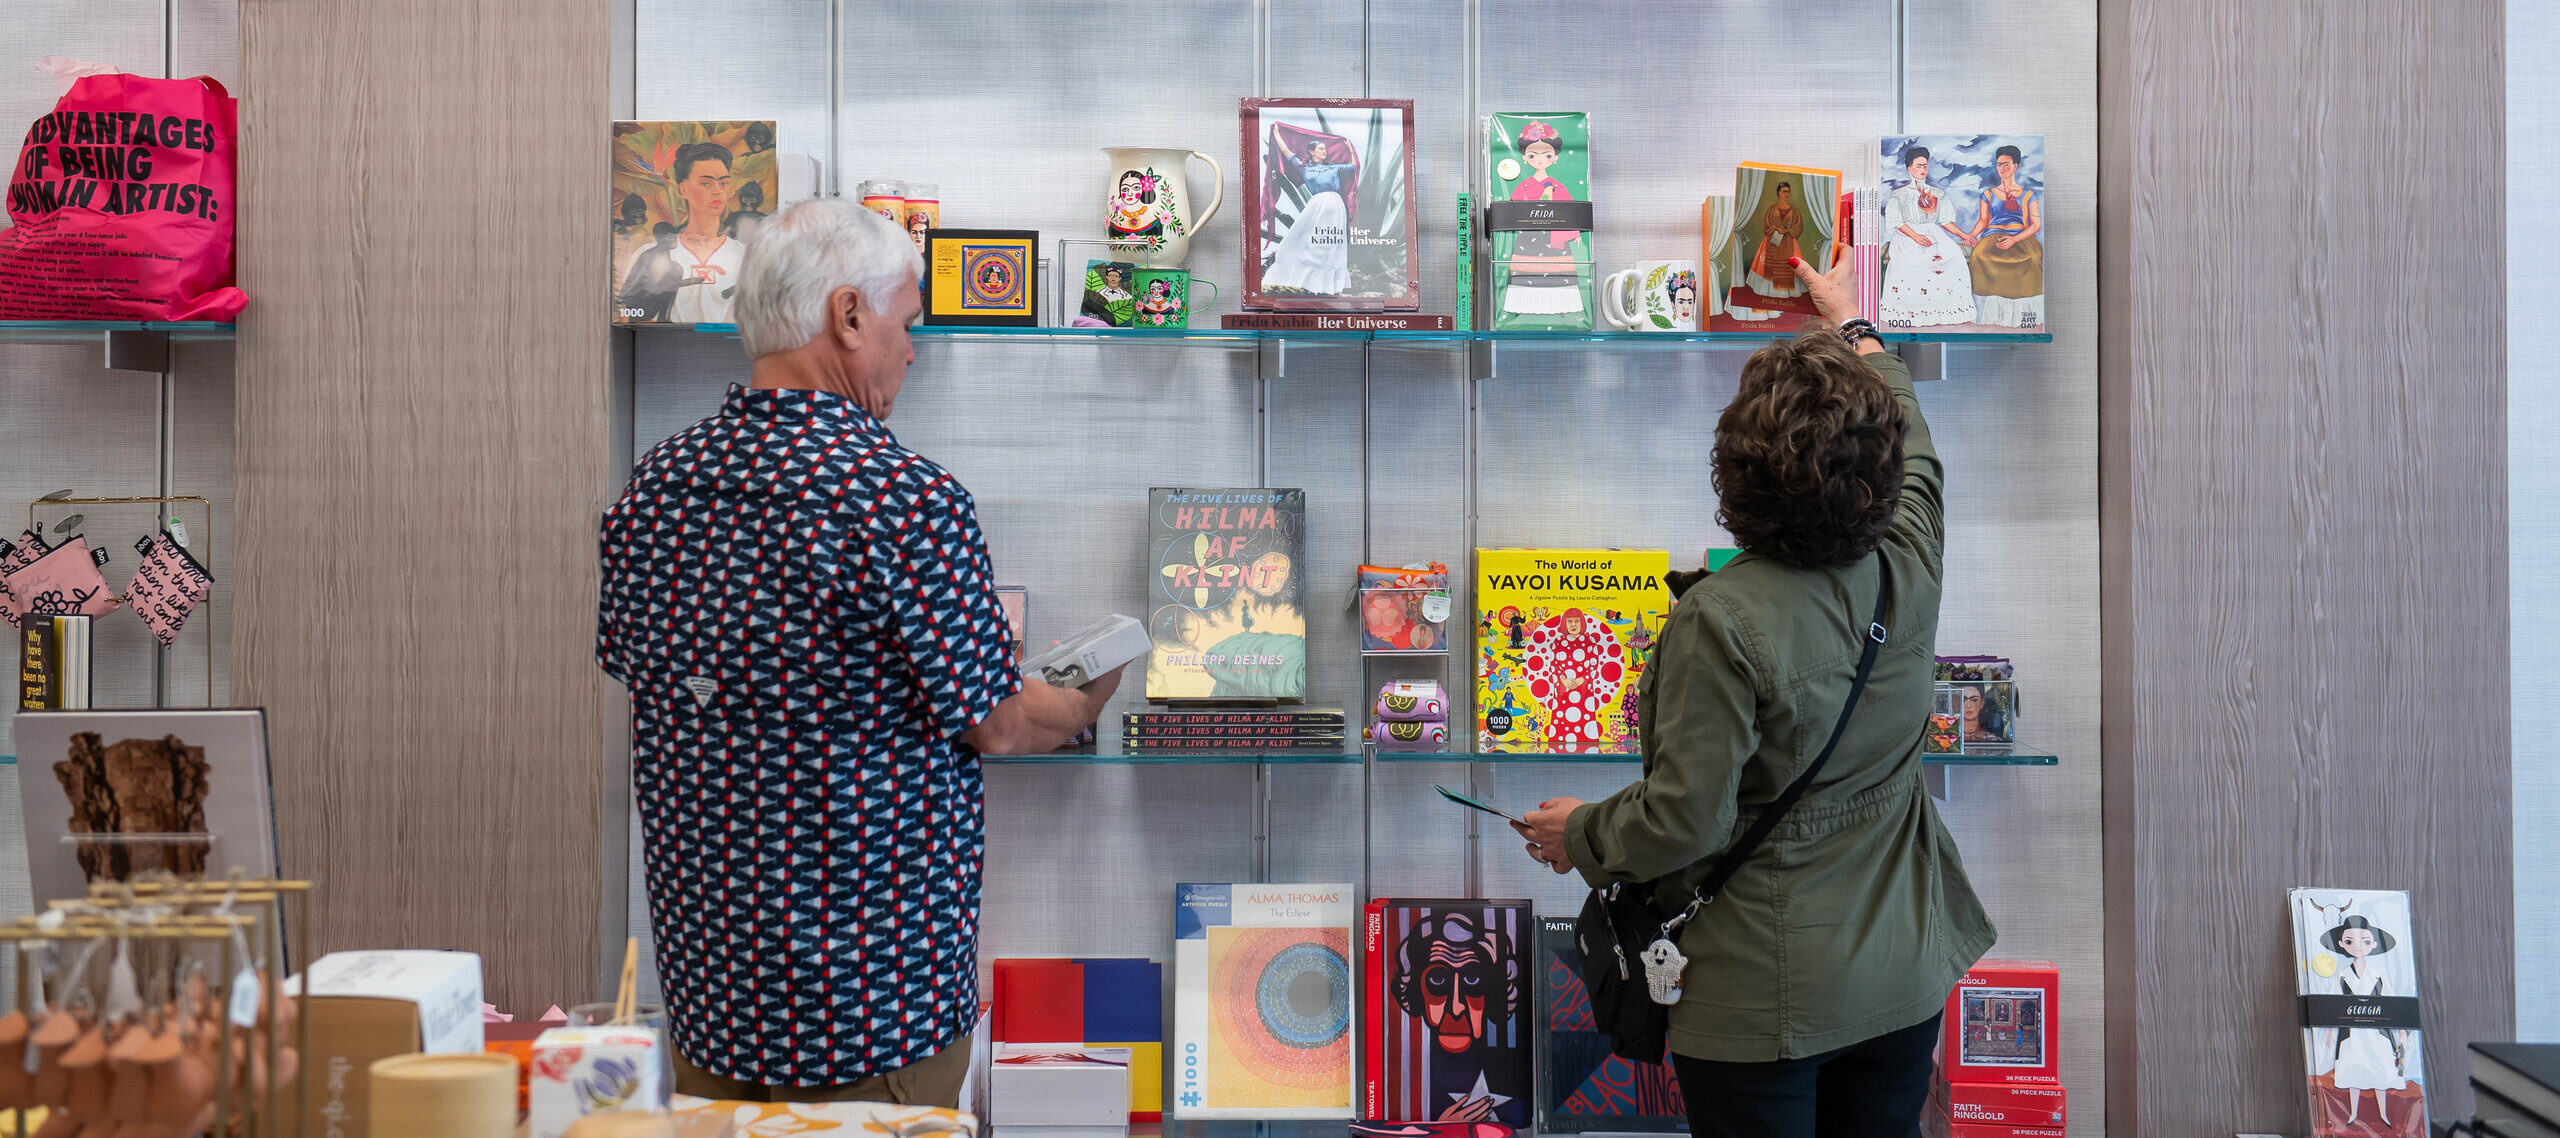 Two visitors are standing in a shop in front wall mounted shelves filled with art books and objects. They have light skin tones and are wearing a patterned shirt and an olive jacket. One of the visitors is reaching for a card depicting a woman in a colorful dress framed by white curtains.